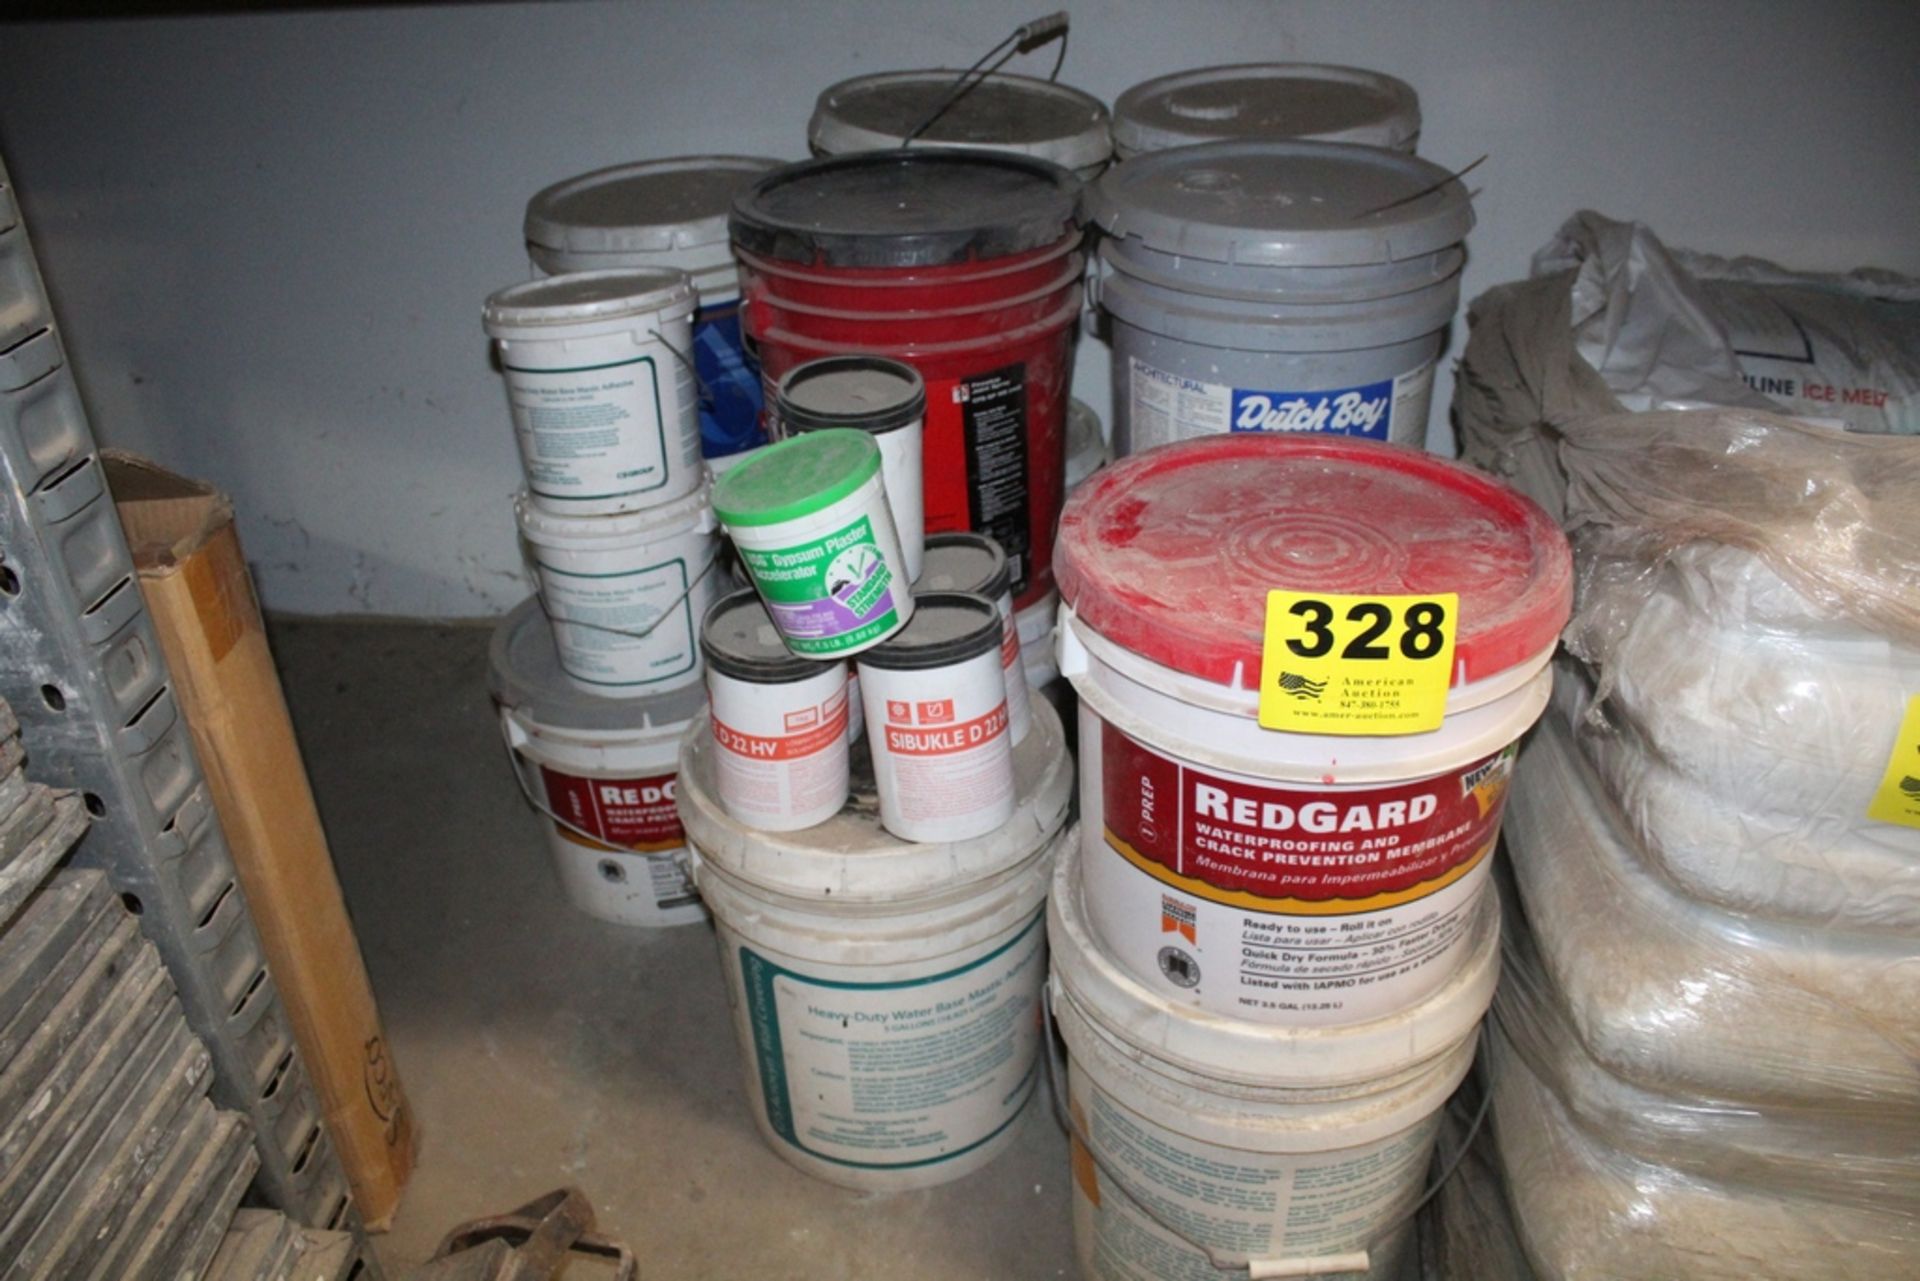 LOT-ASSORTED PAINTS AND ADHESIVES IN 5-GAL. PAILS